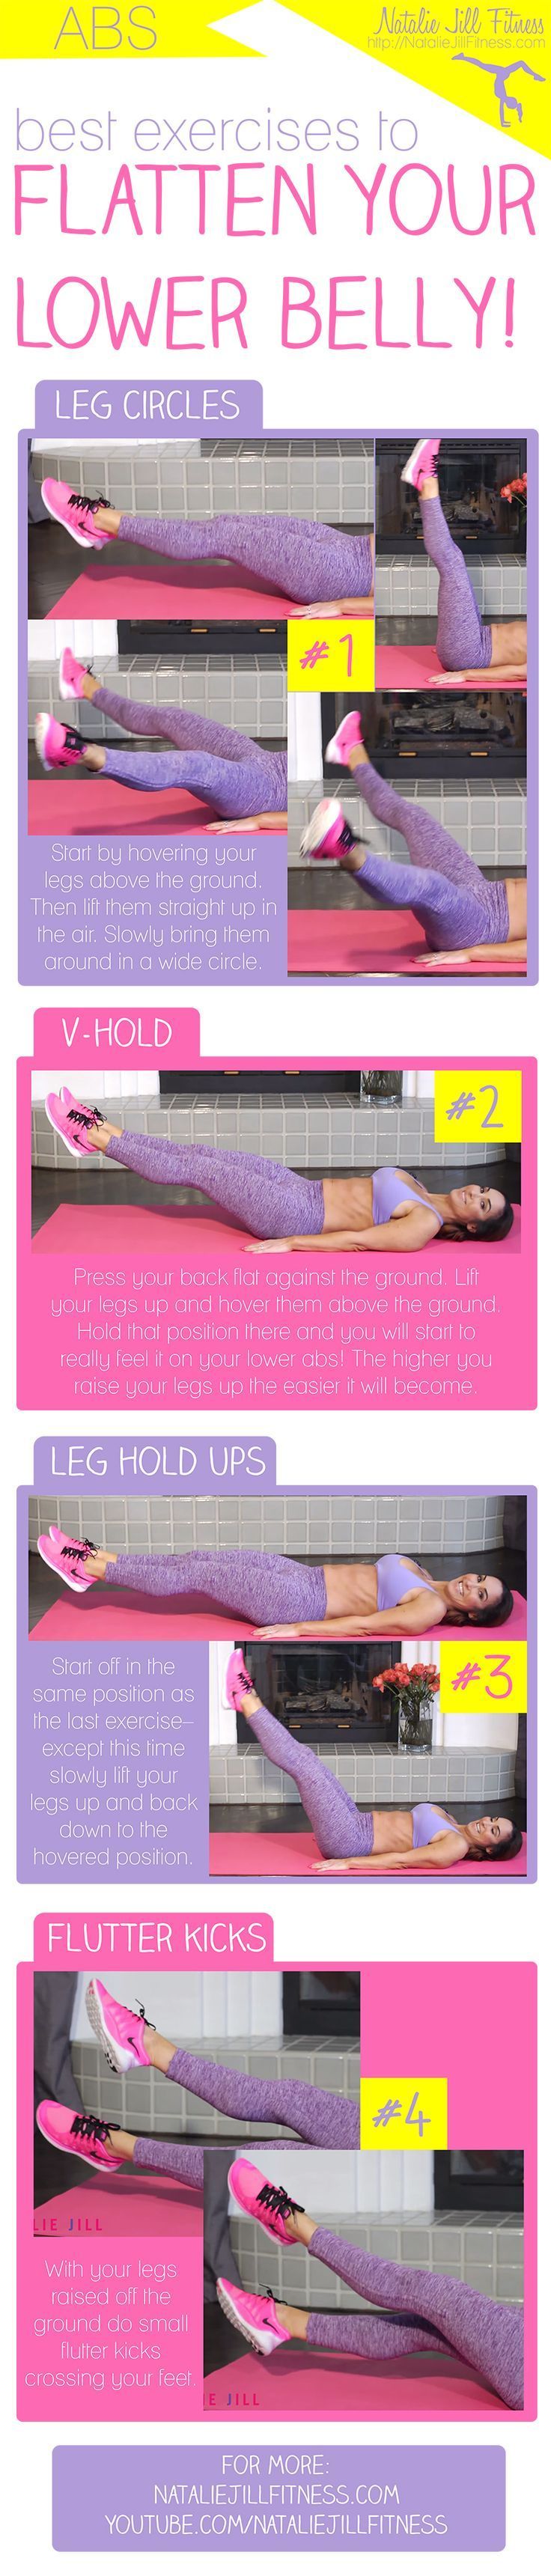 Belly Pooch Be GONE!!!! Here Are The BEST Exercises To Flatten Your Lower Belly!!! Click On The Link B